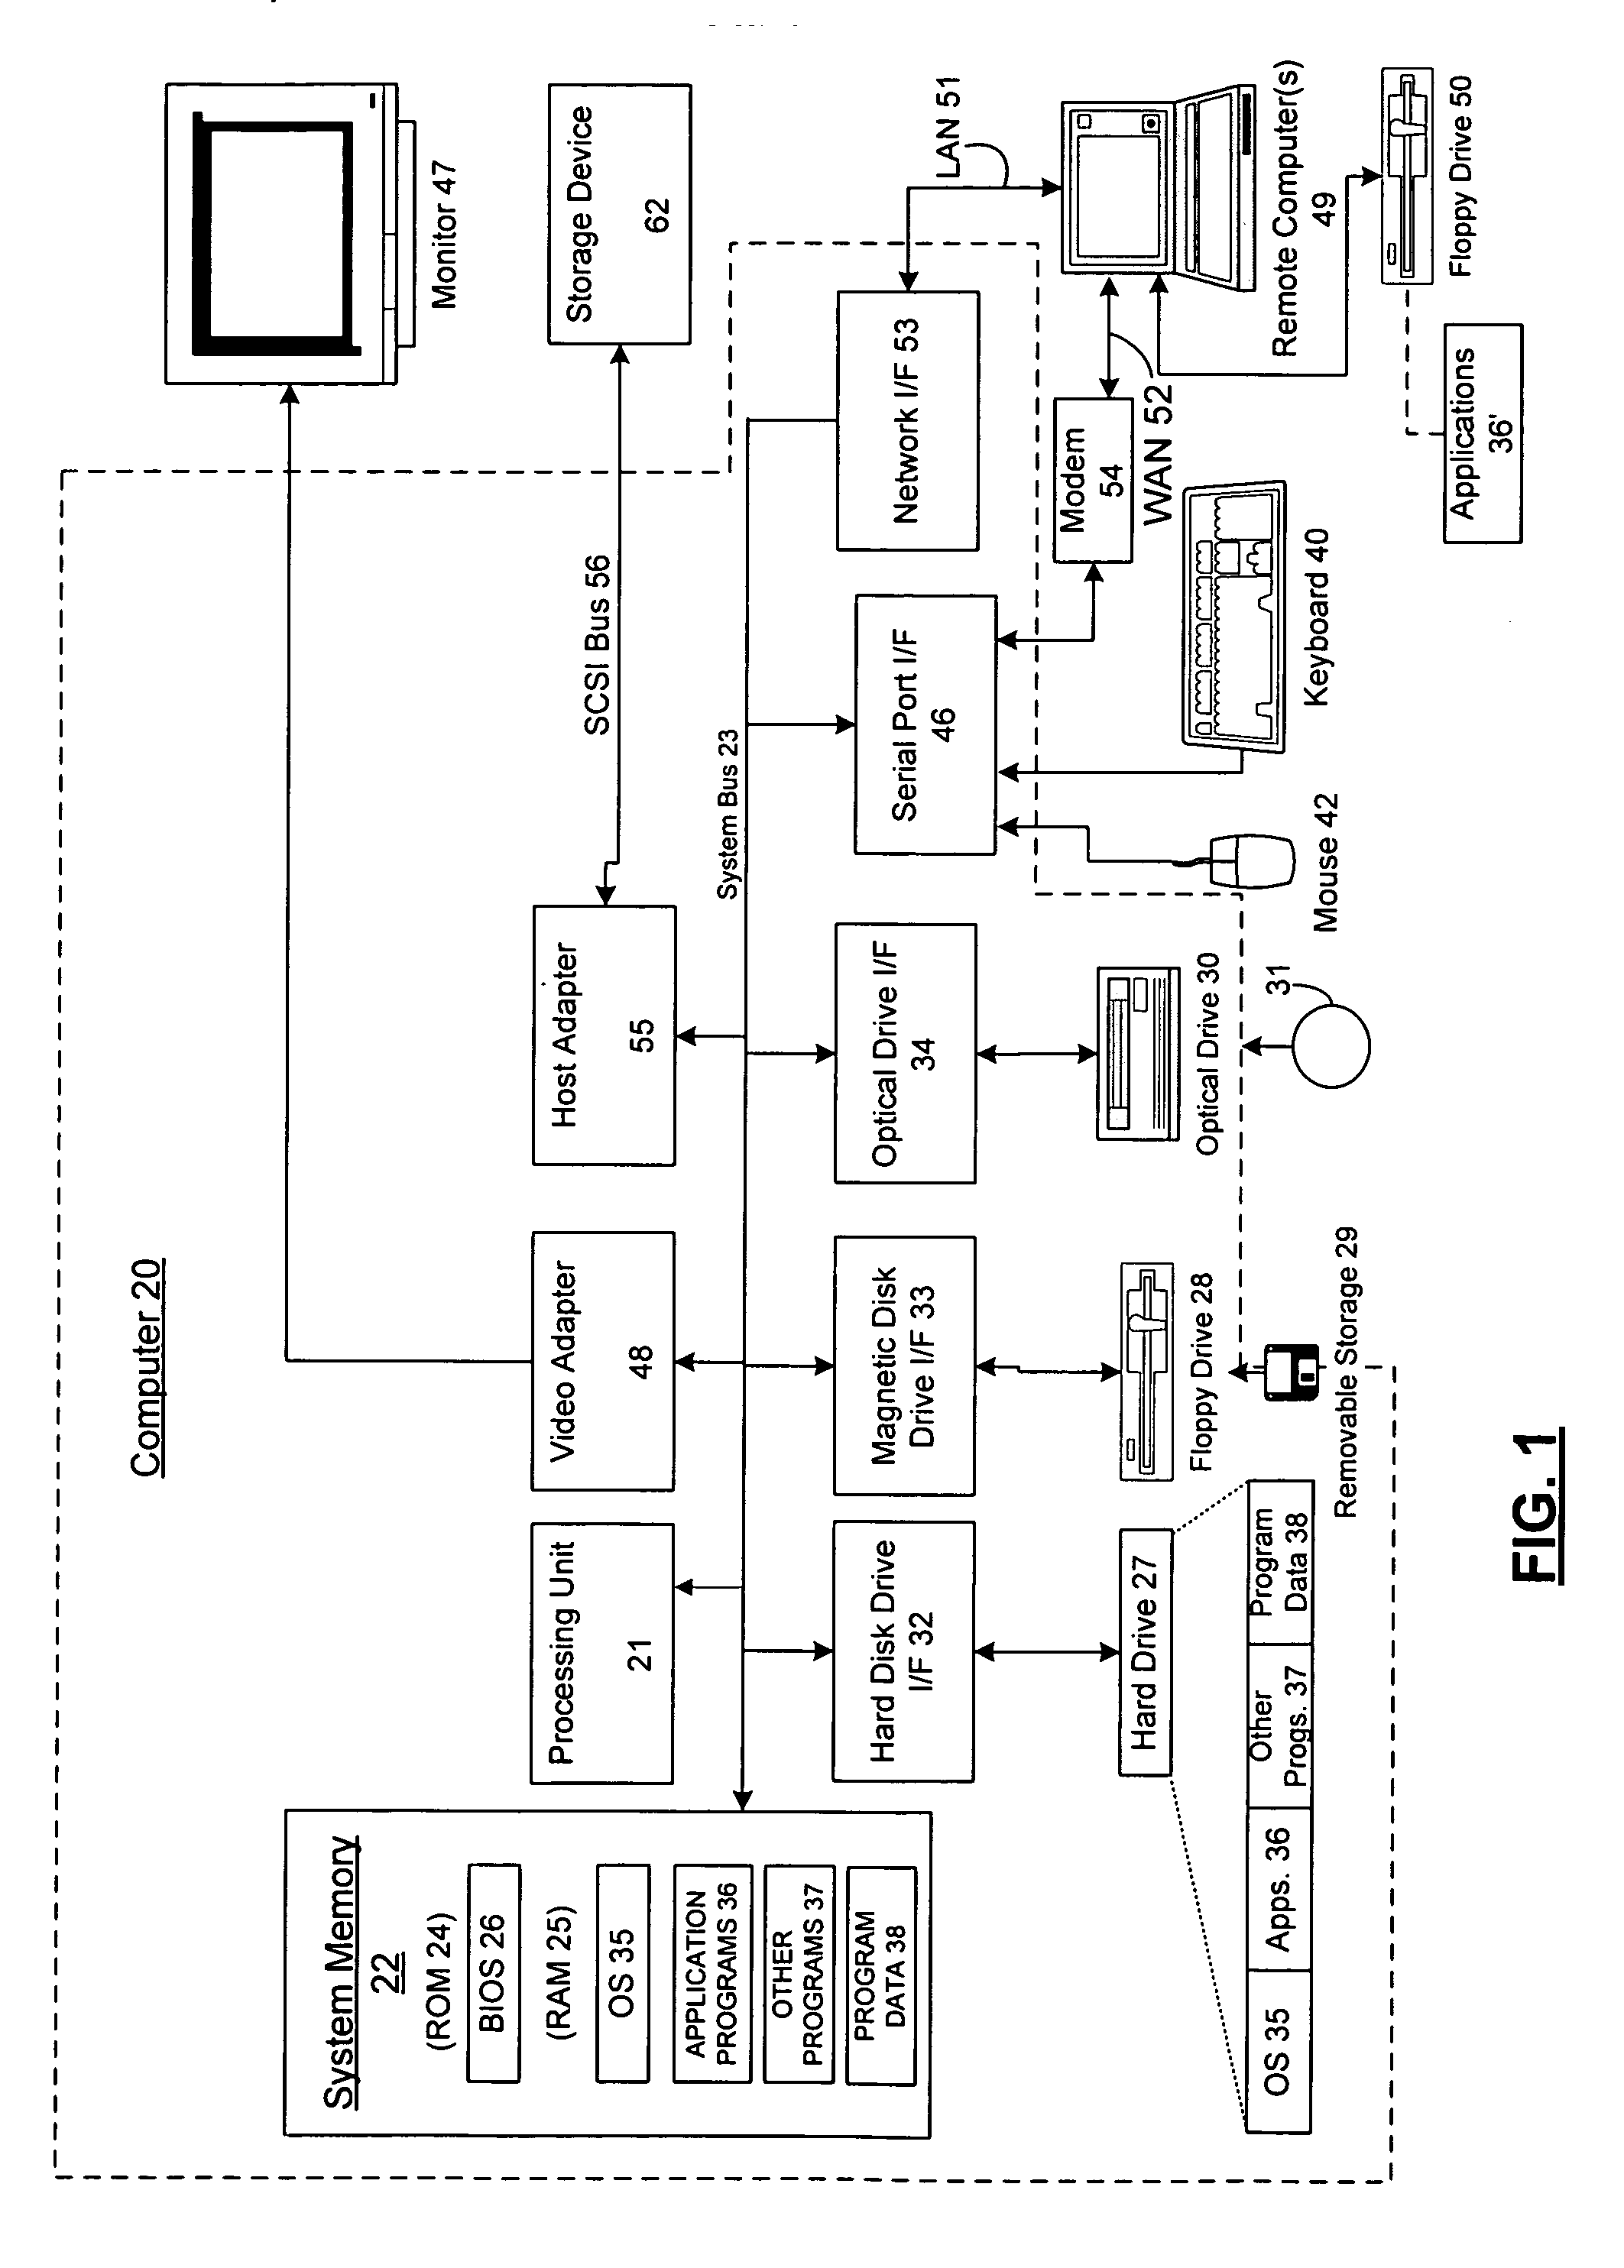 Systems and methods for improving the x86 architecture for processor virtualization, and software systems and methods for utilizing the improvements